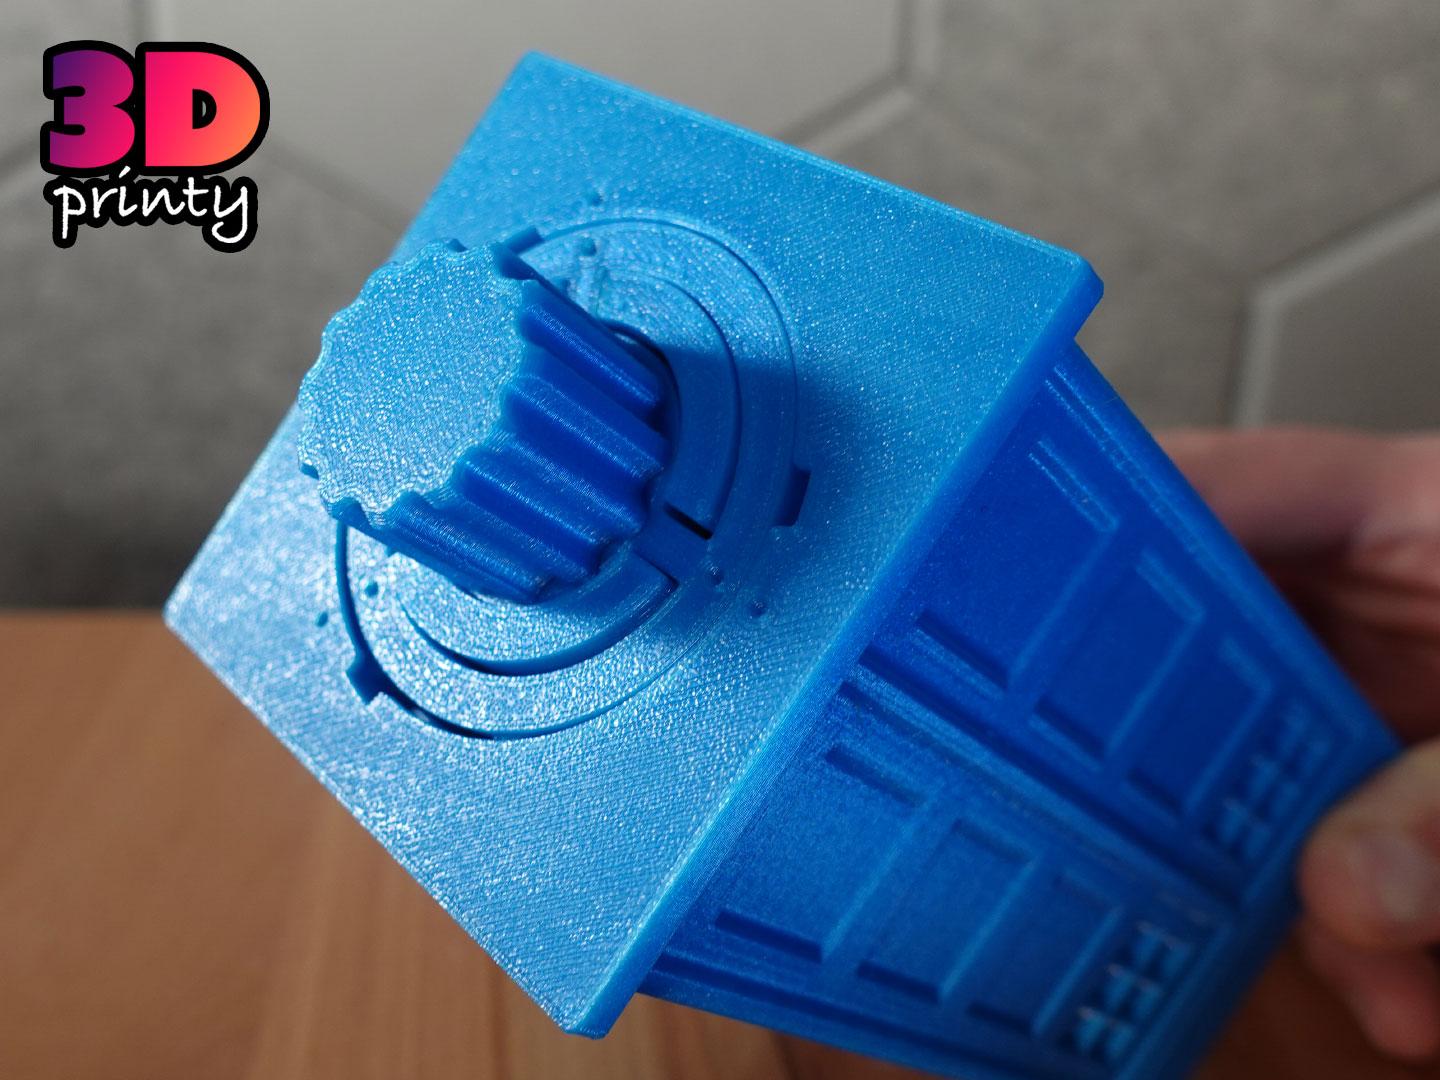 Print-in-Place Twisty Puzzle - TARDIS 3d model